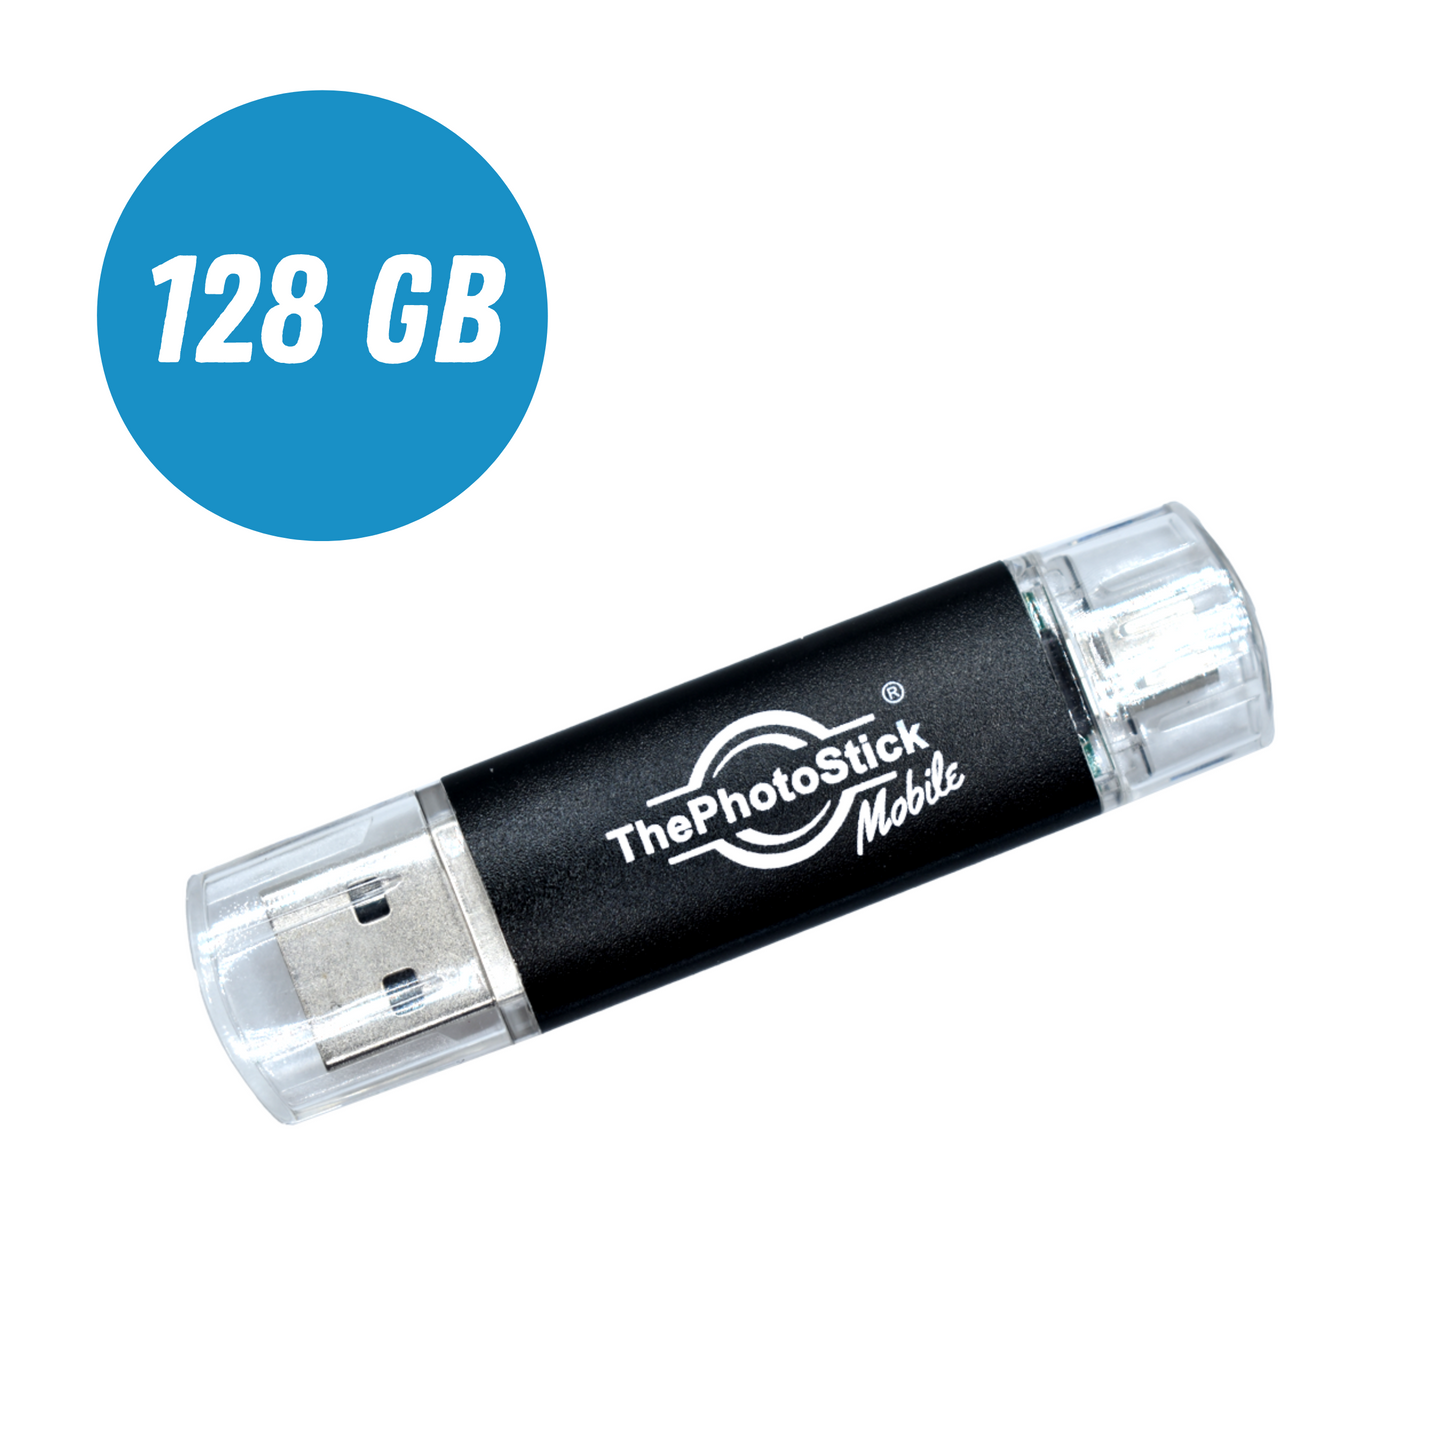 ThePhotoStick® Mobile 128 GB for Android